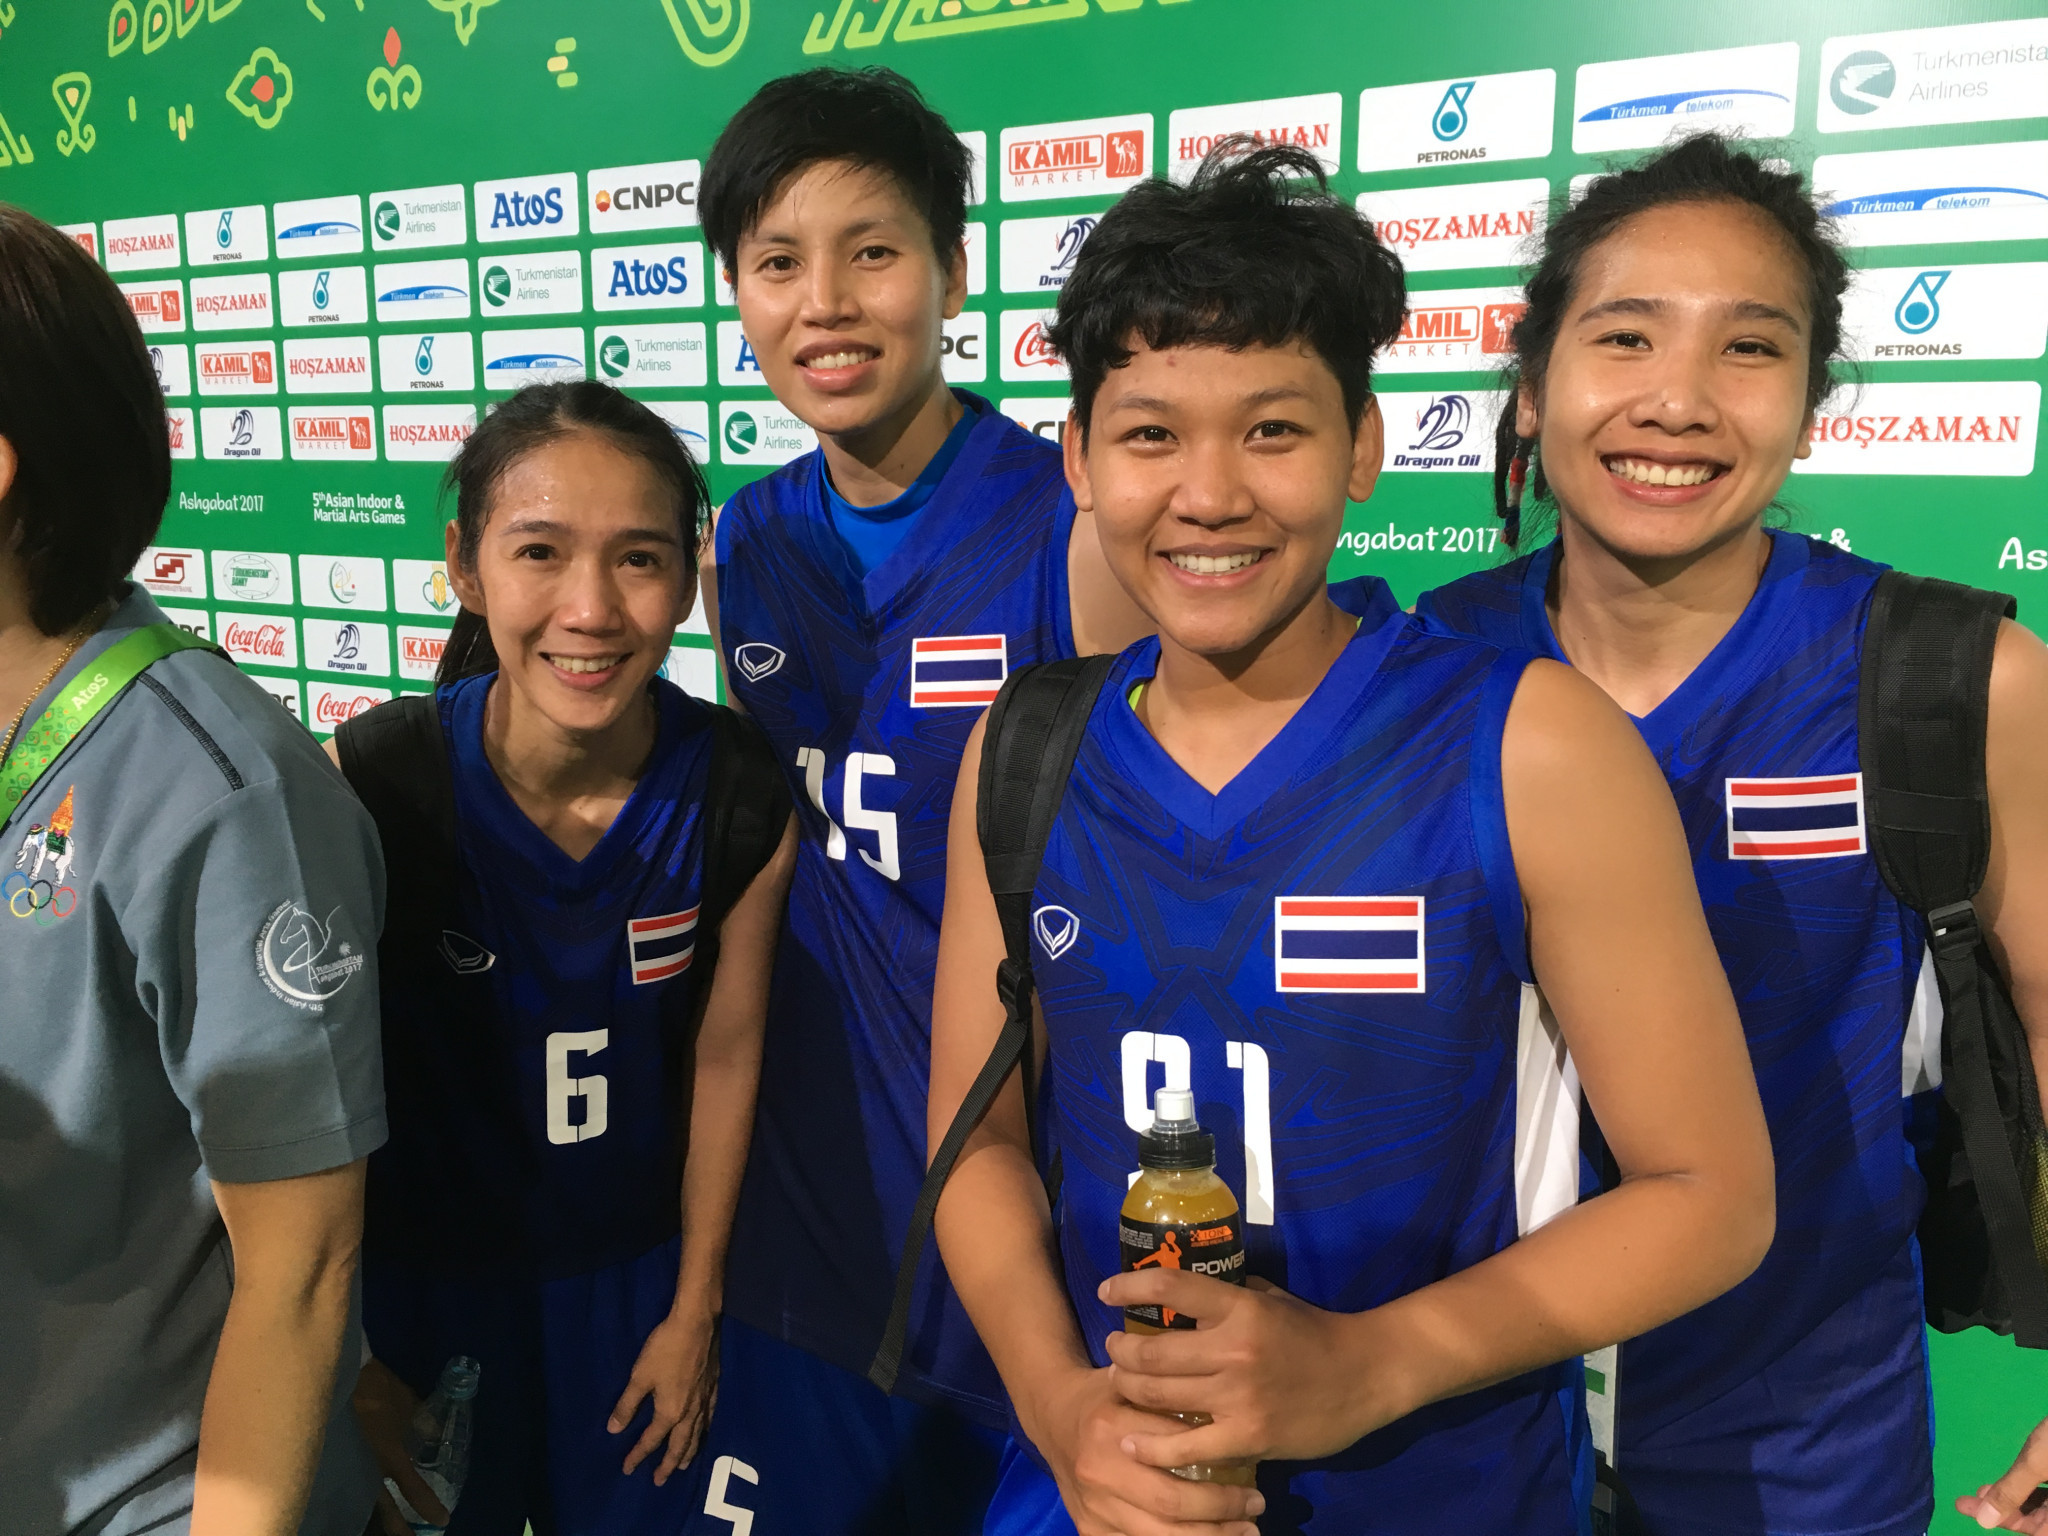 Thailand came out on top in the women's 3x3 basketball event ©Ashgabat 2017/Michael Church